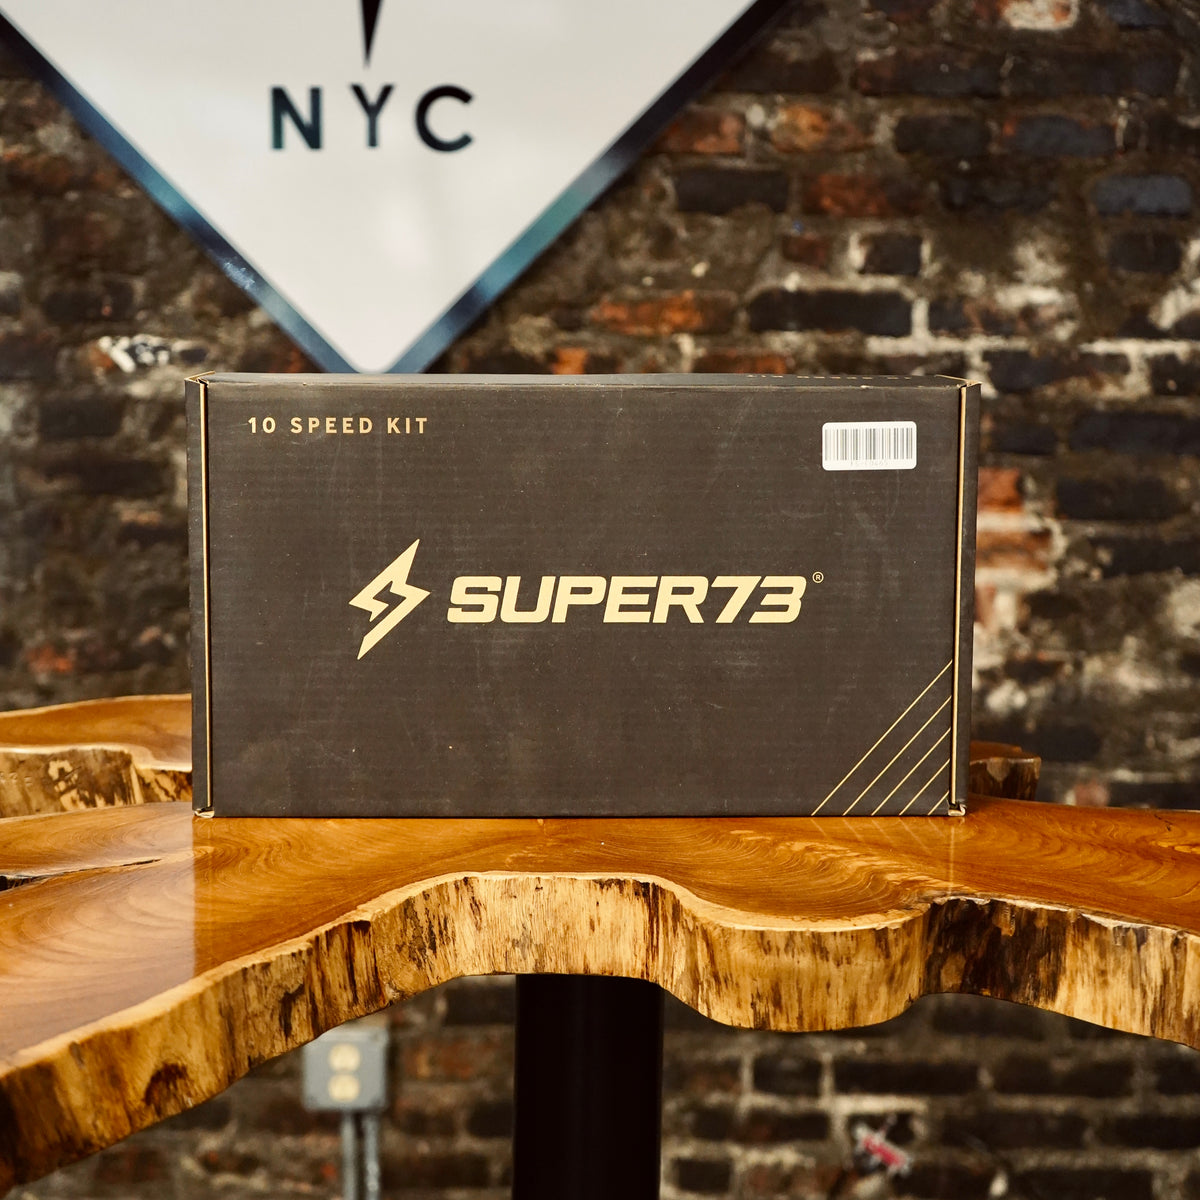 Image of the Super73 10-Speed Kit box.